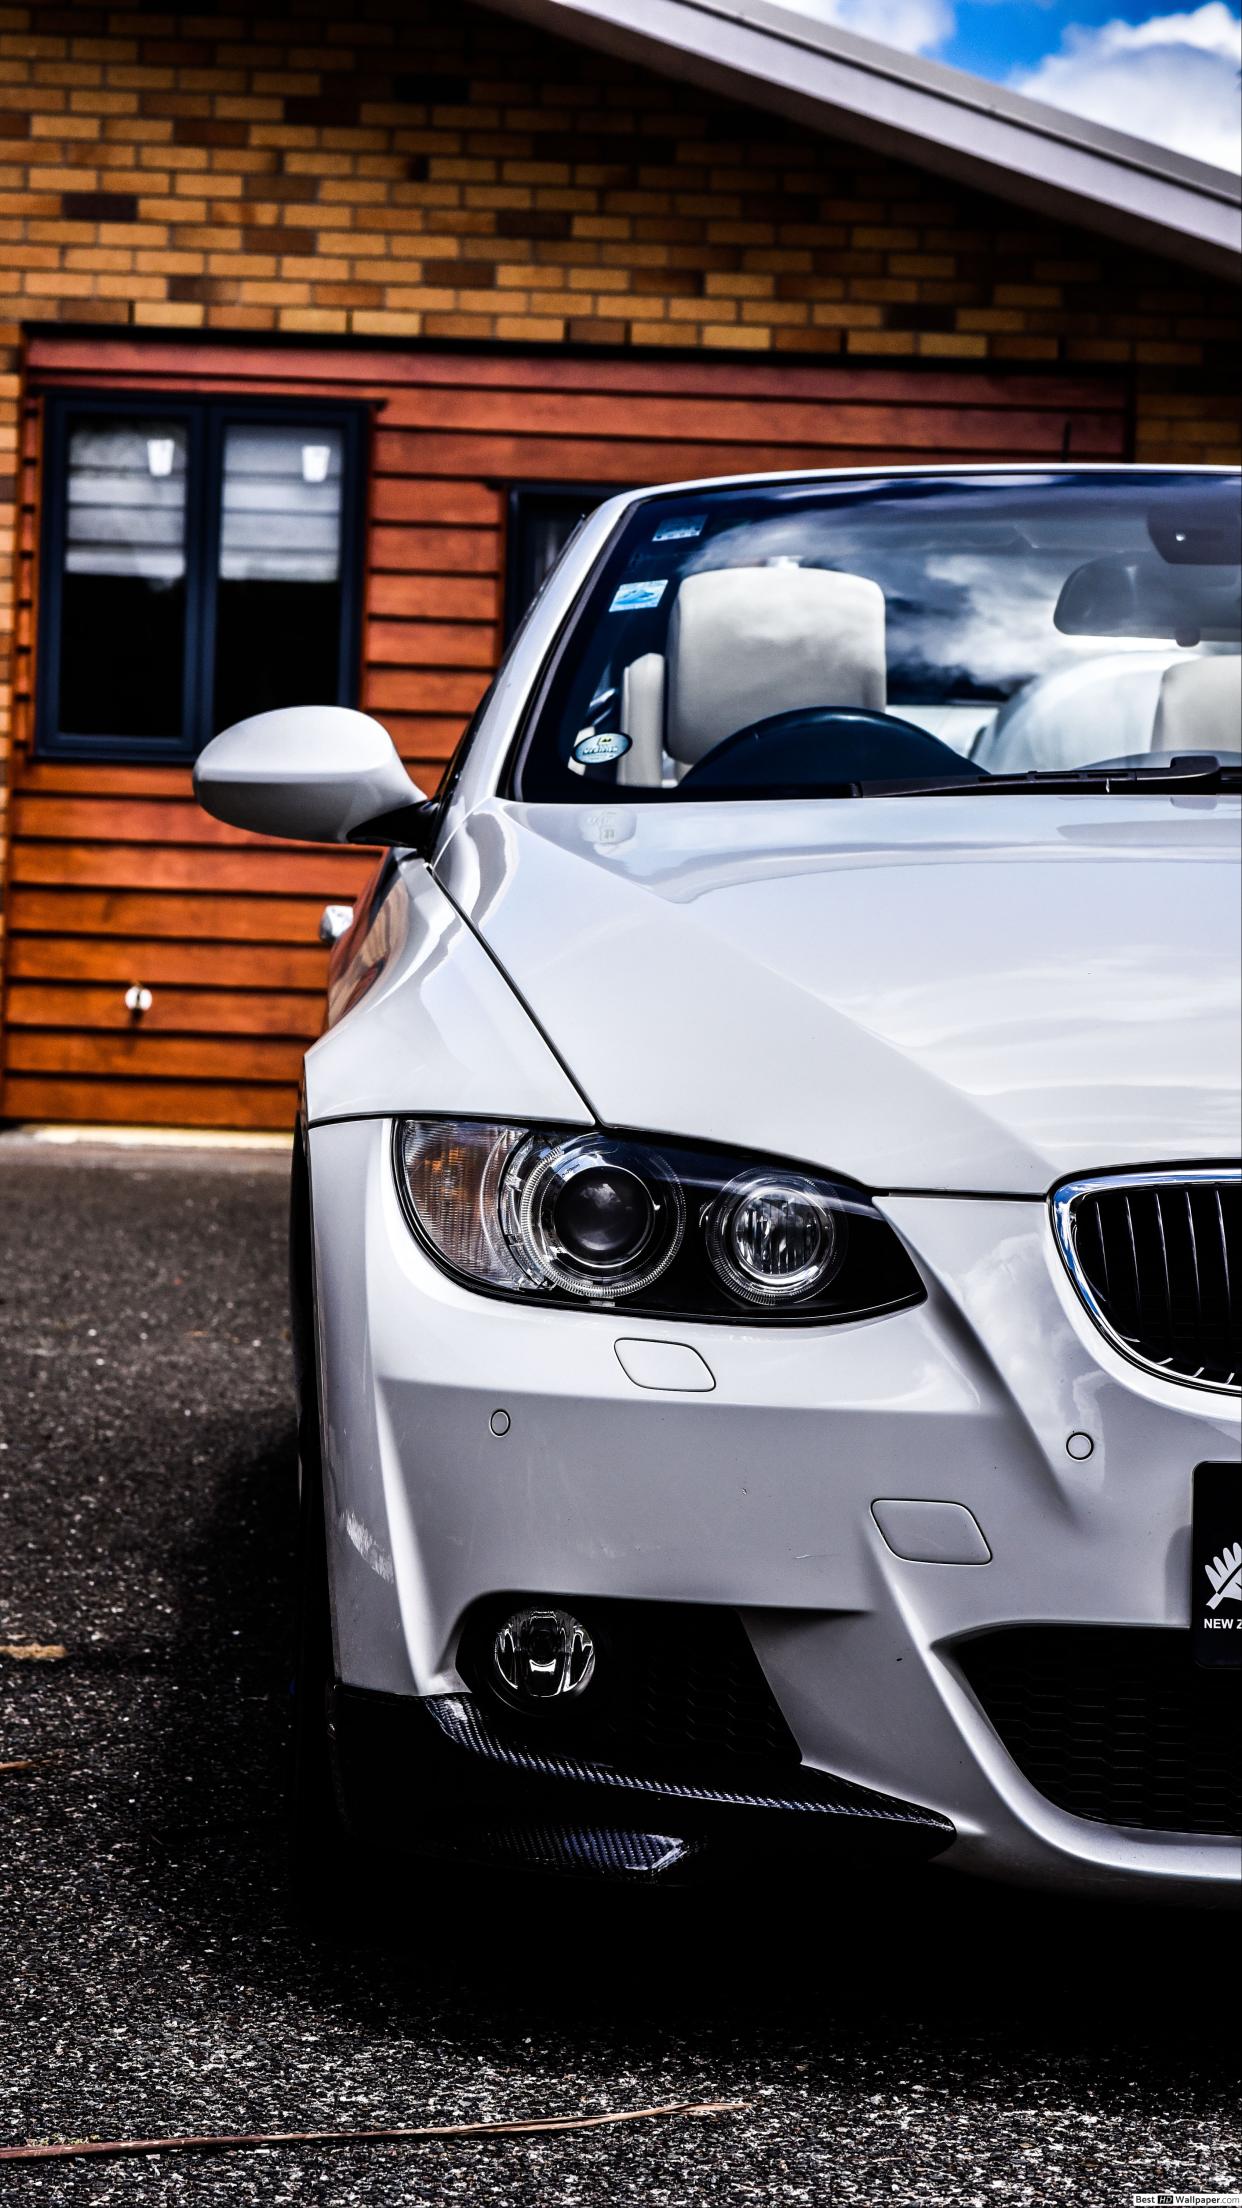 Silver BMW 335i Parking In Front of House HD wallpaper download